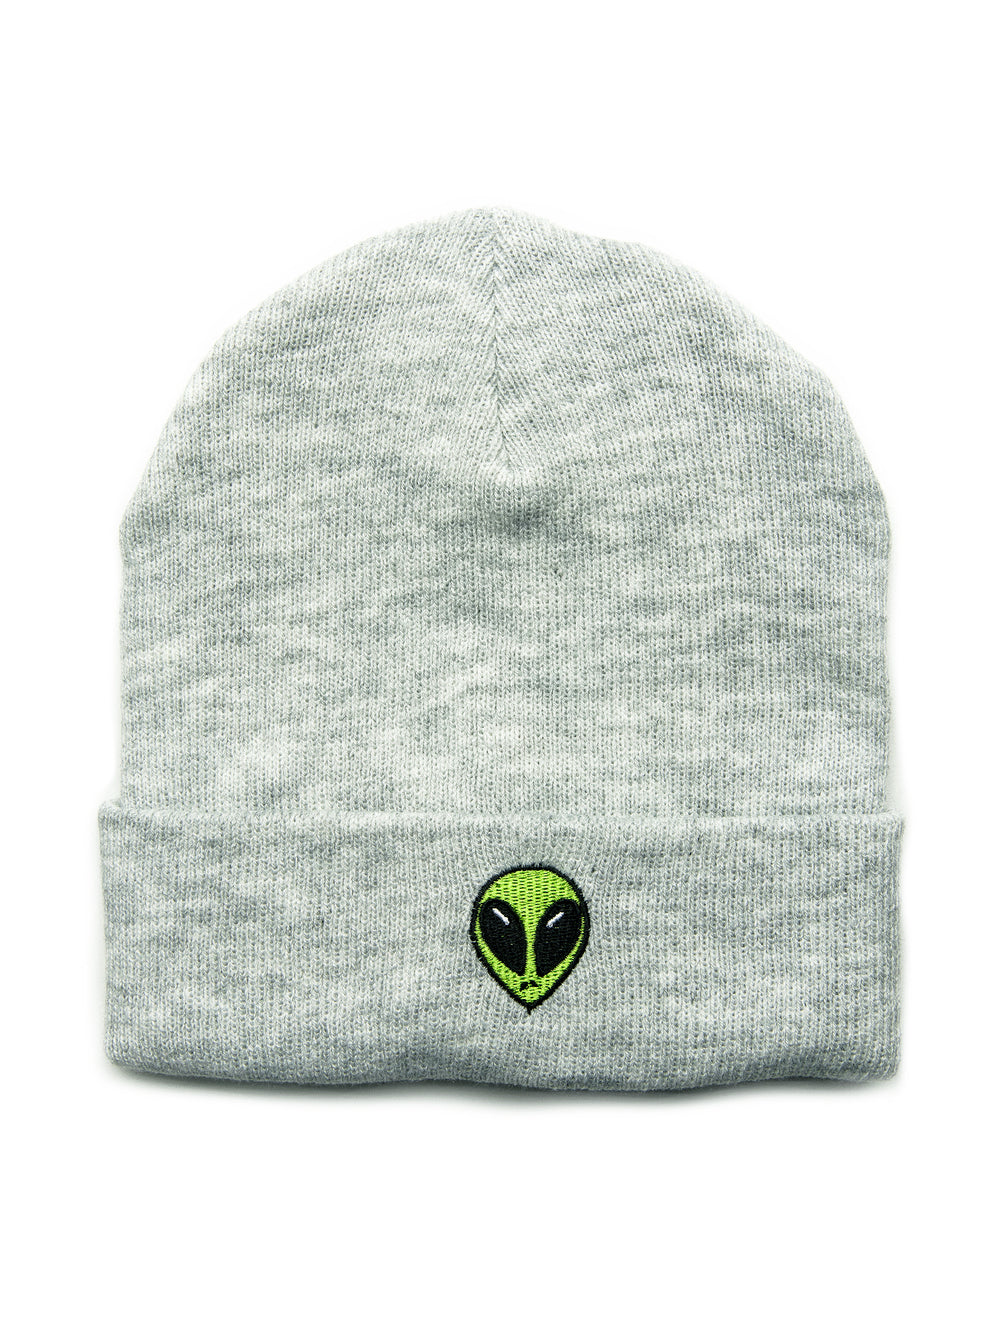 KOLBY BLACK EMBROIDERED BEANIE - ALIEN - CLEARANCE